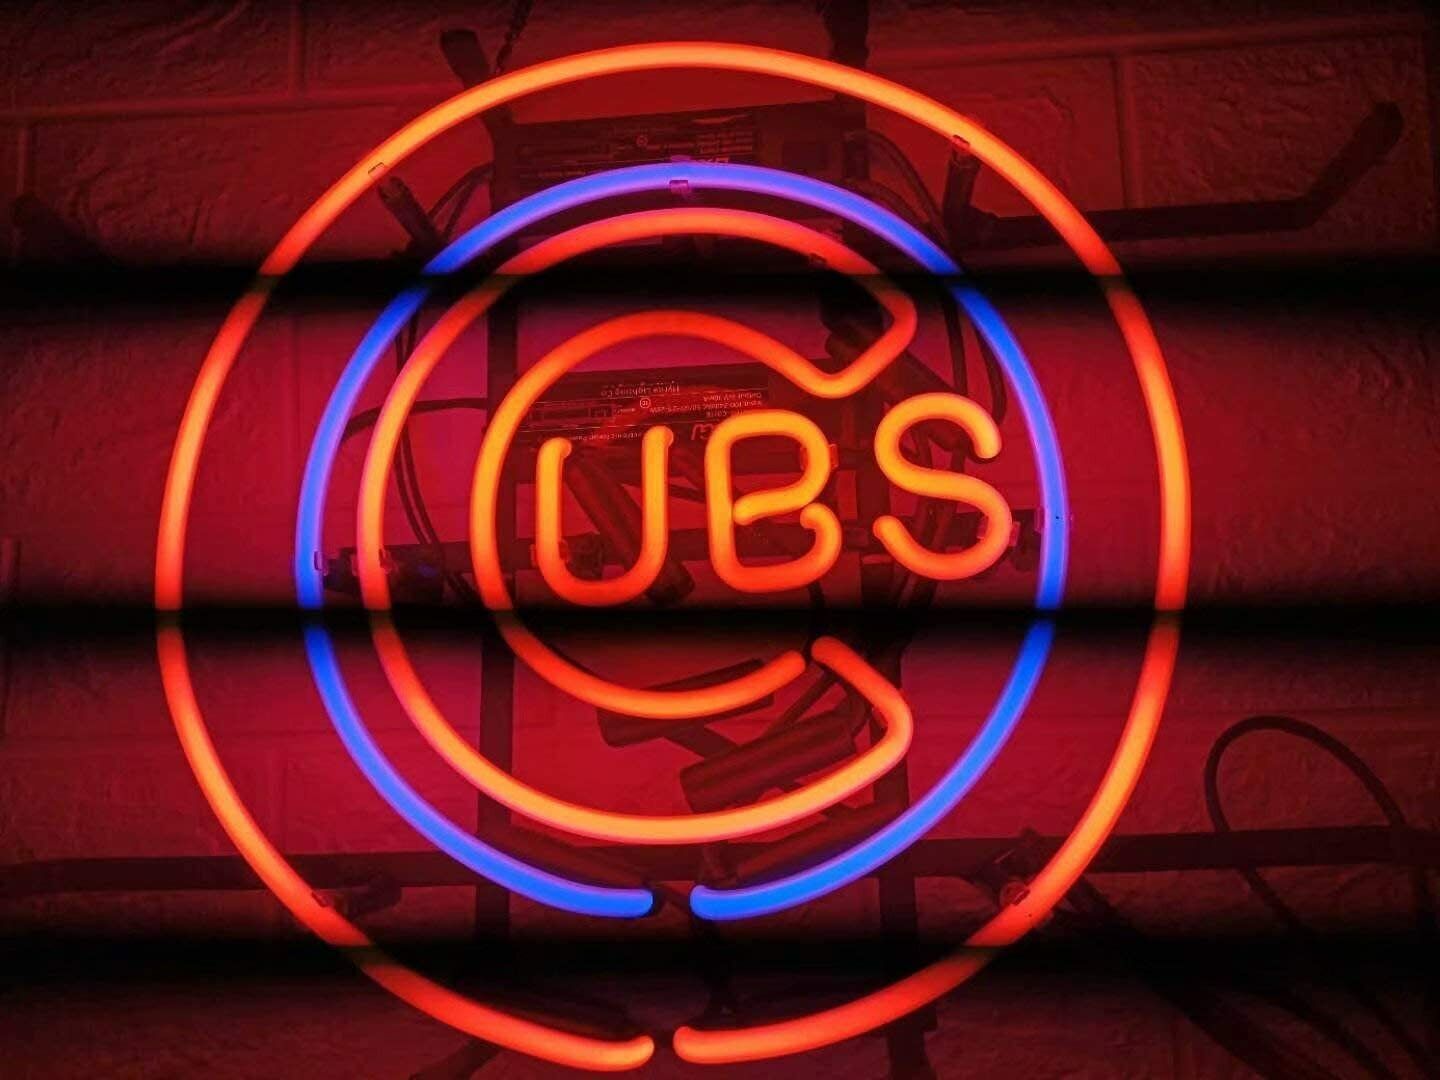 Chicago Cubs 2016 World Series 17